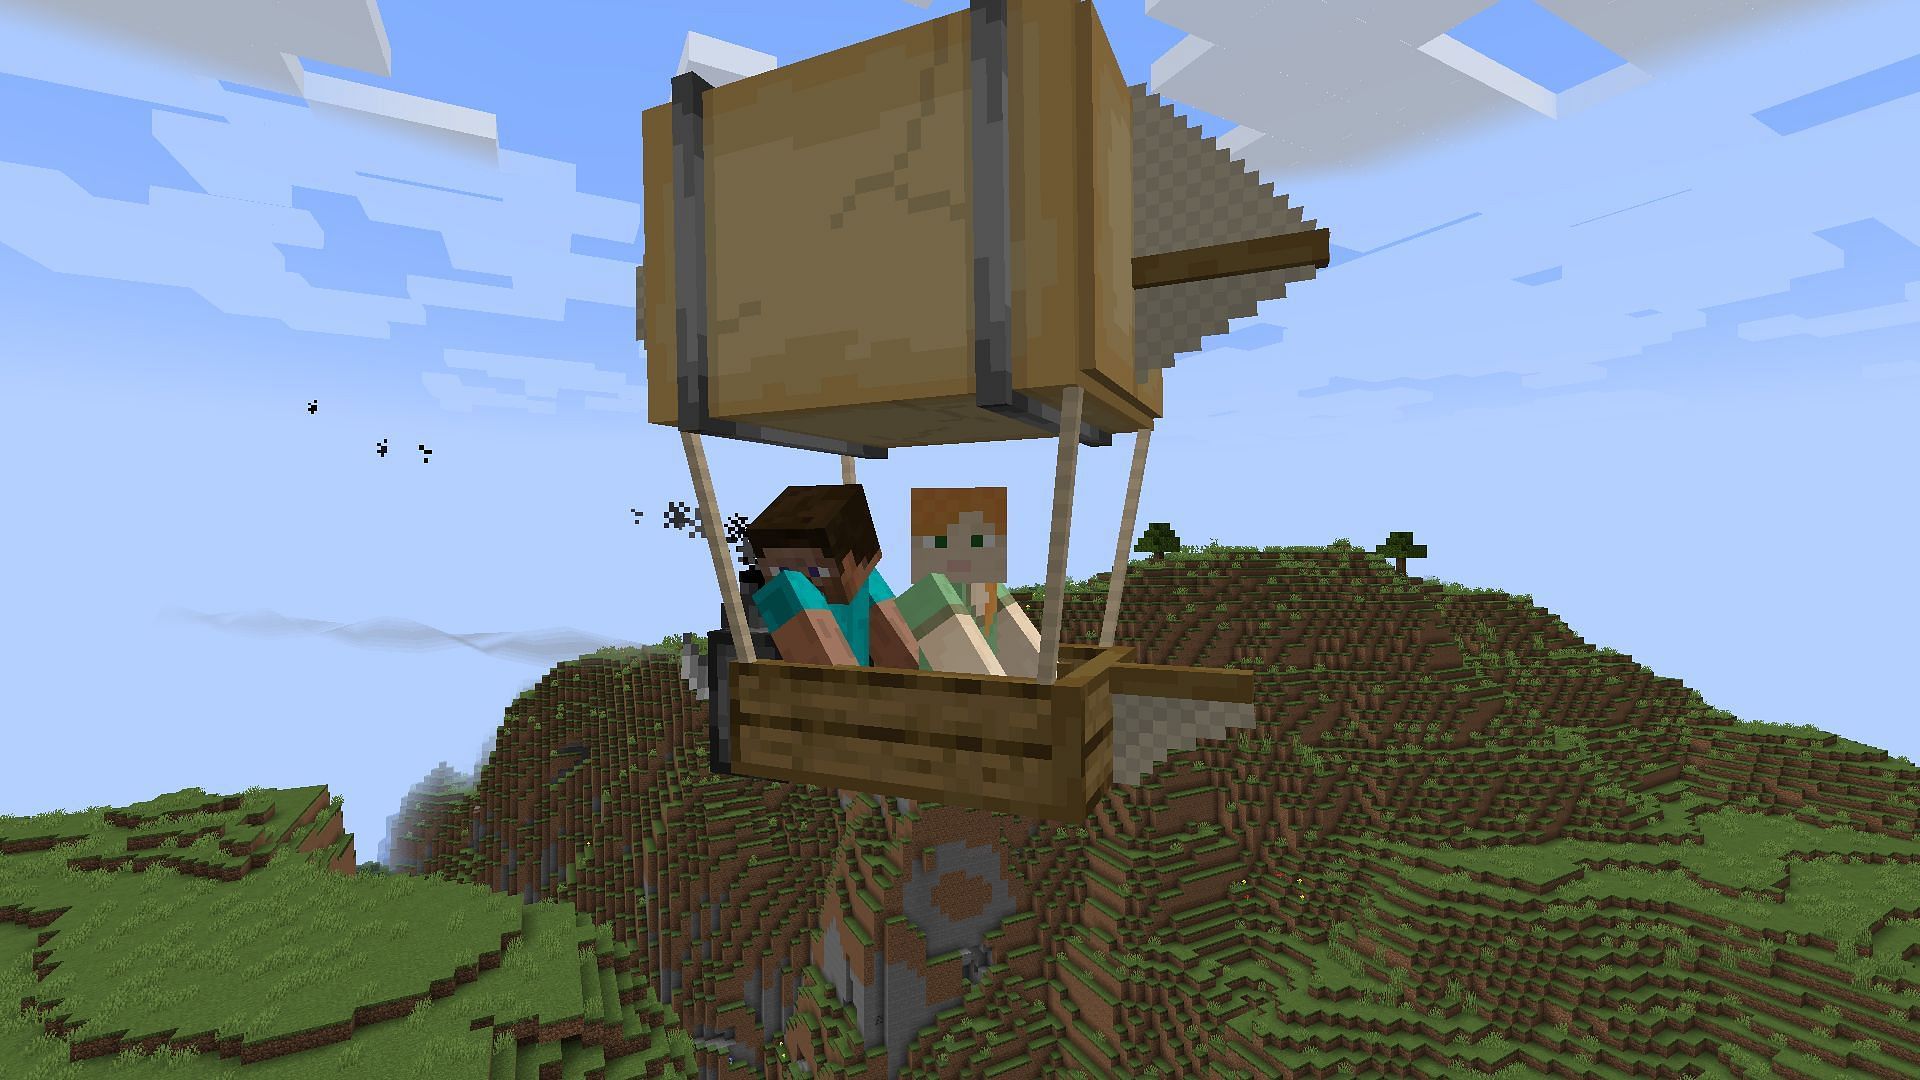 Immersive Aircraft introduces lore-friendly craftable flying machines to Minecraft (Image via Luke100000/Modrinth)